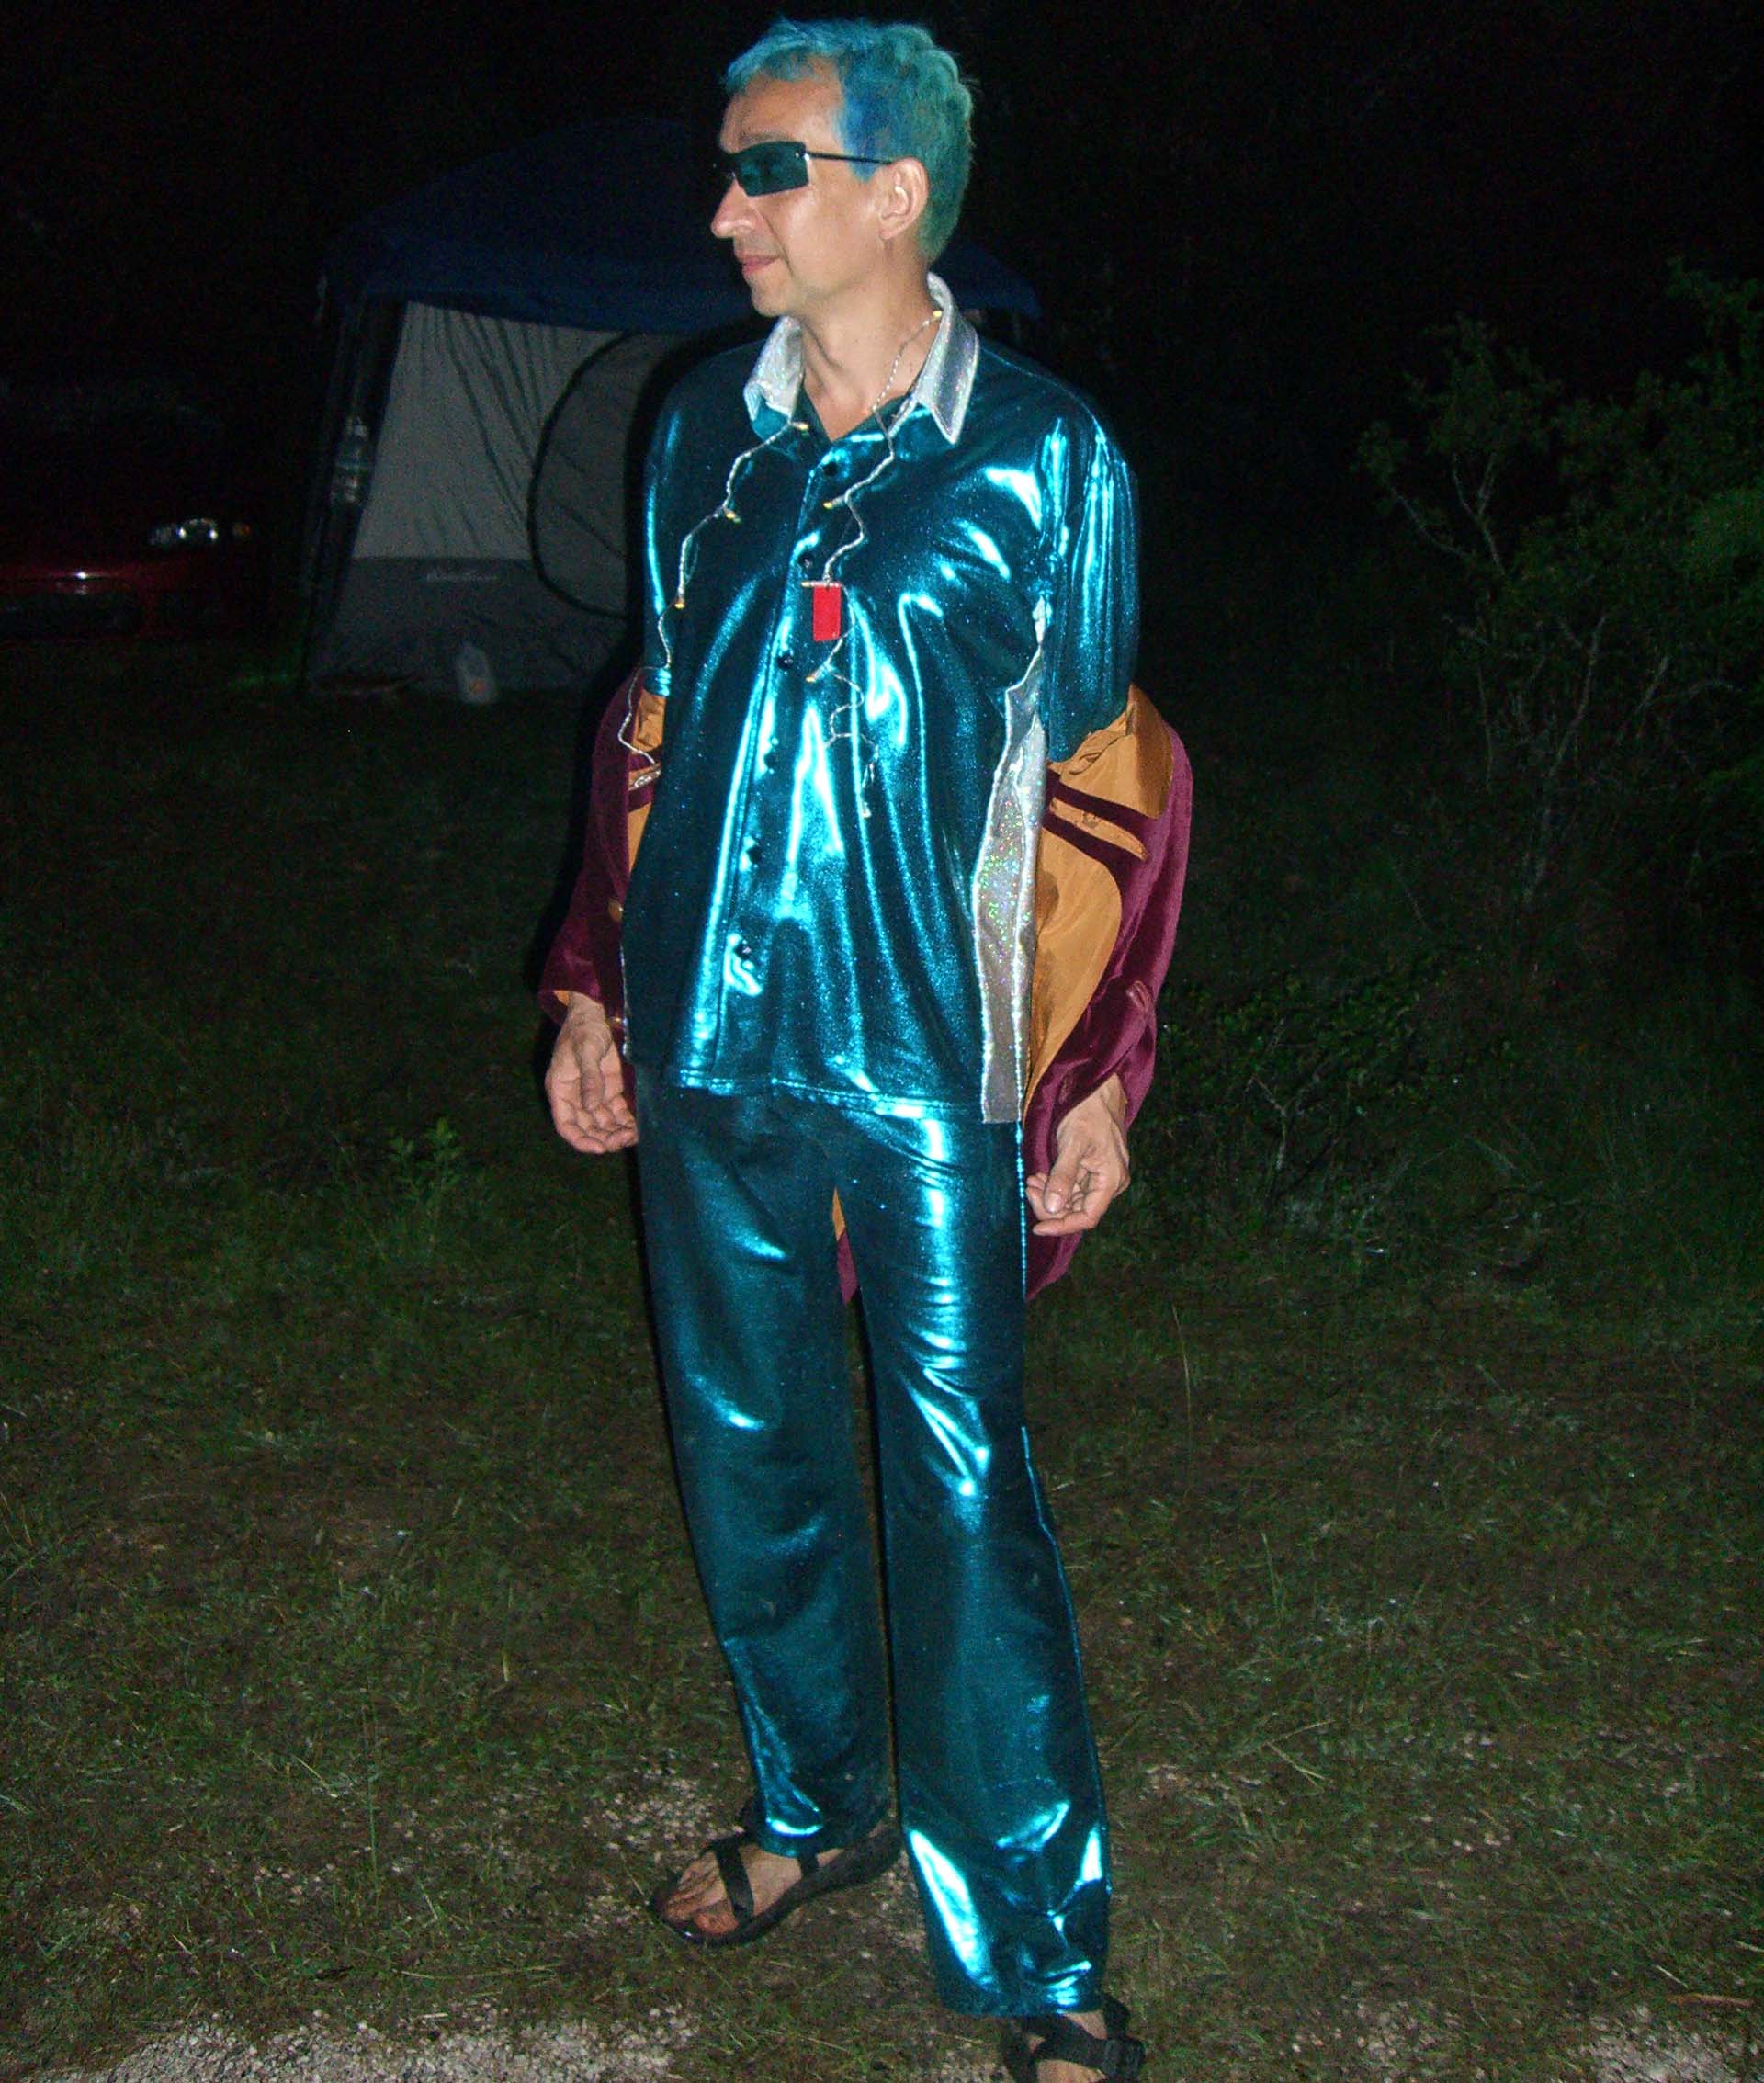 A person in a shiny teal costume at Burning Flipside 2007